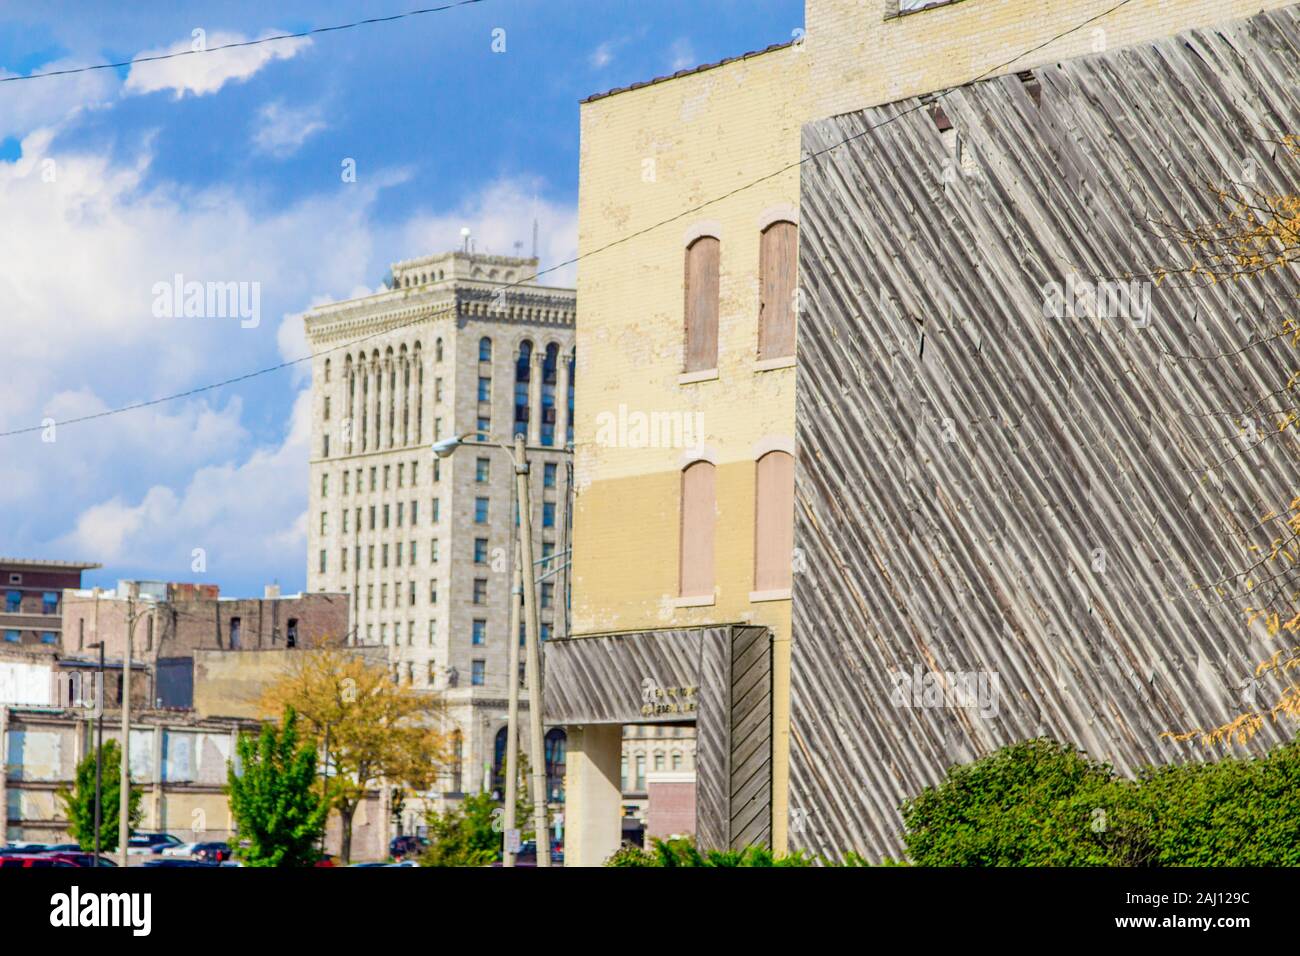 Downtown Saginaw Michigan. City streets and buildings of the downtown district of Saginaw. The city is located in the Midwest state of Michigan. Stock Photo